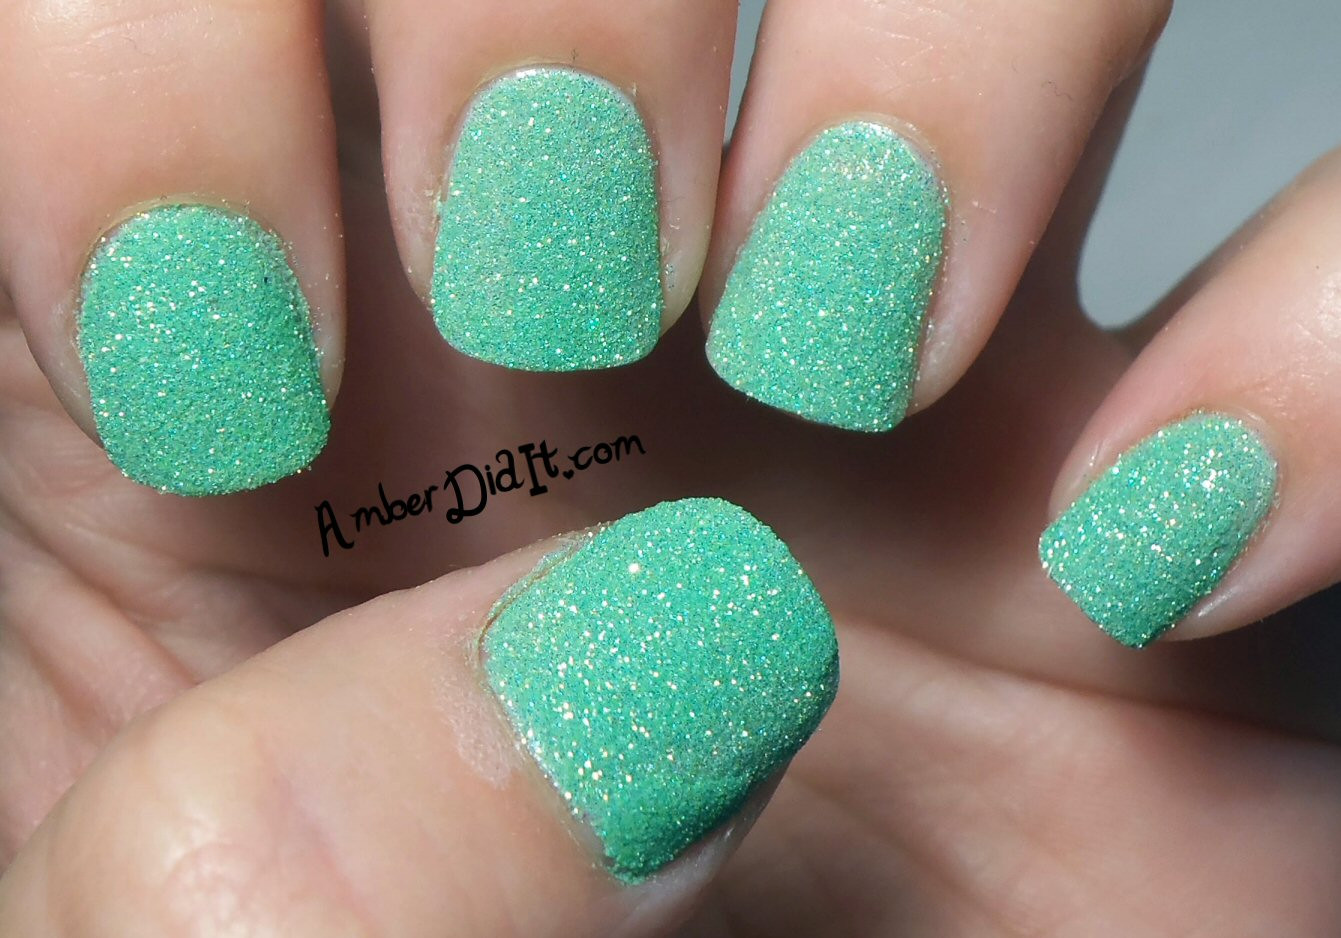 7. Glitter Nail Designs with Vibrant Colors - wide 5